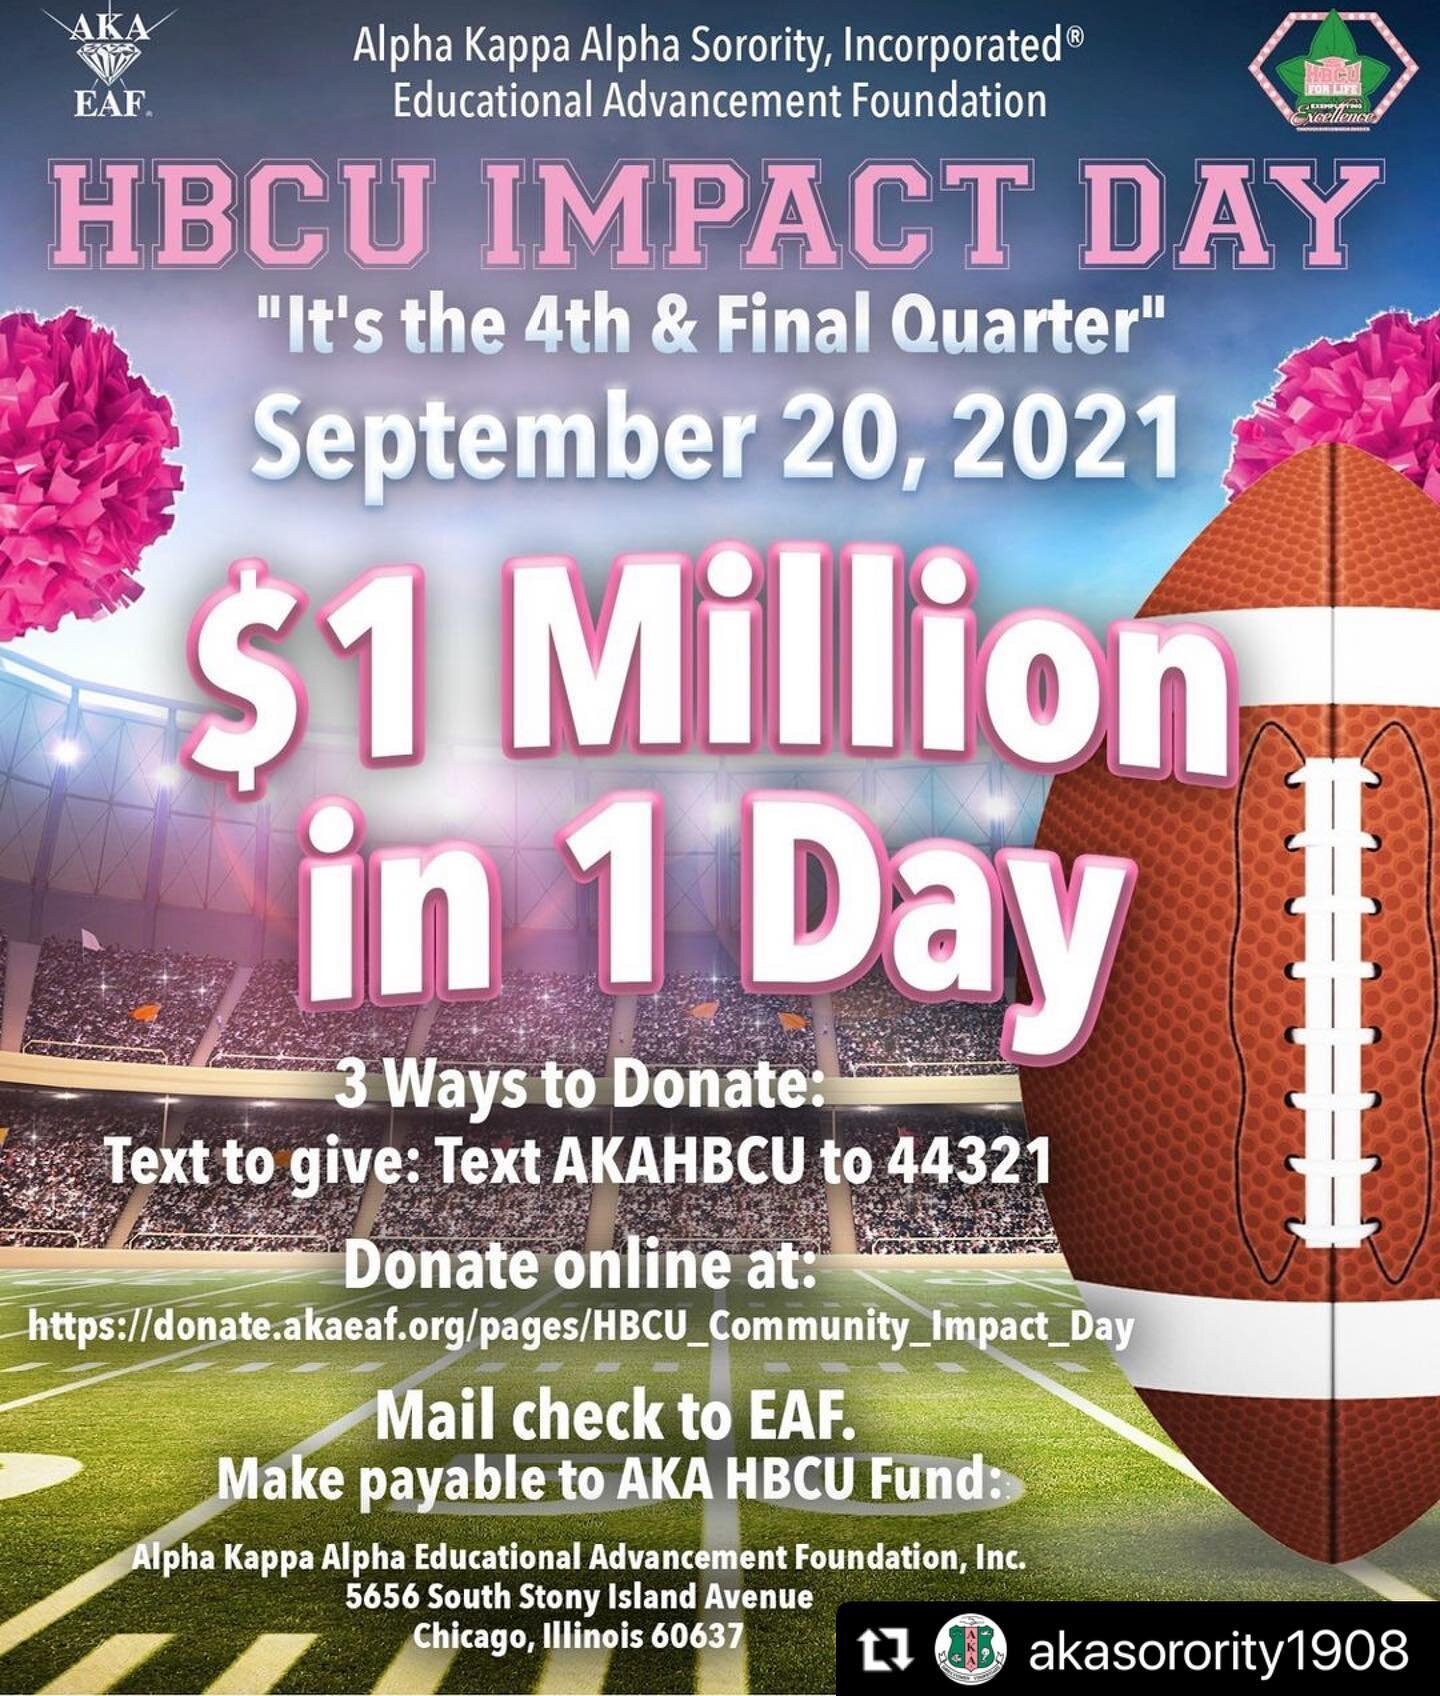 #Repost @akasorority1908 
・・・
Are you ready? Next Monday, September 20, we will make history by raising $1 million in one day for a fourth, consecutive year!

There are three ways to give. Let's make HBCU Impact Day 2021 a success!